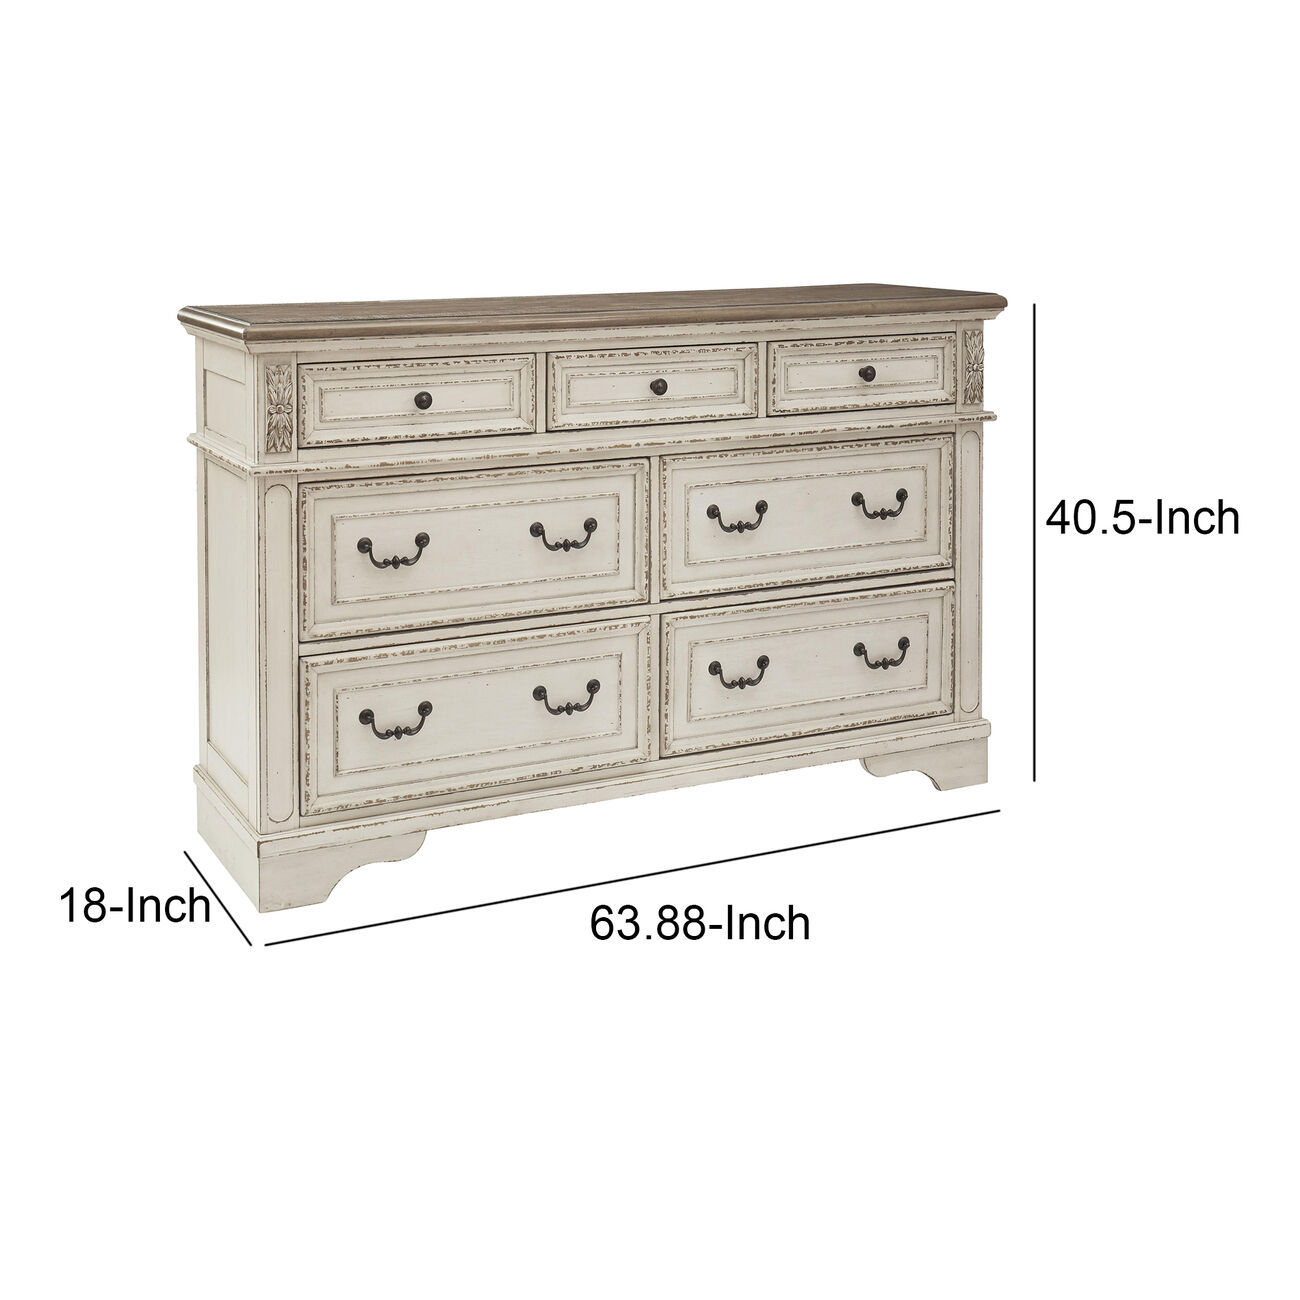 7 Drawer Wooden Molded Dresser with Bracket Feet, White and Brown